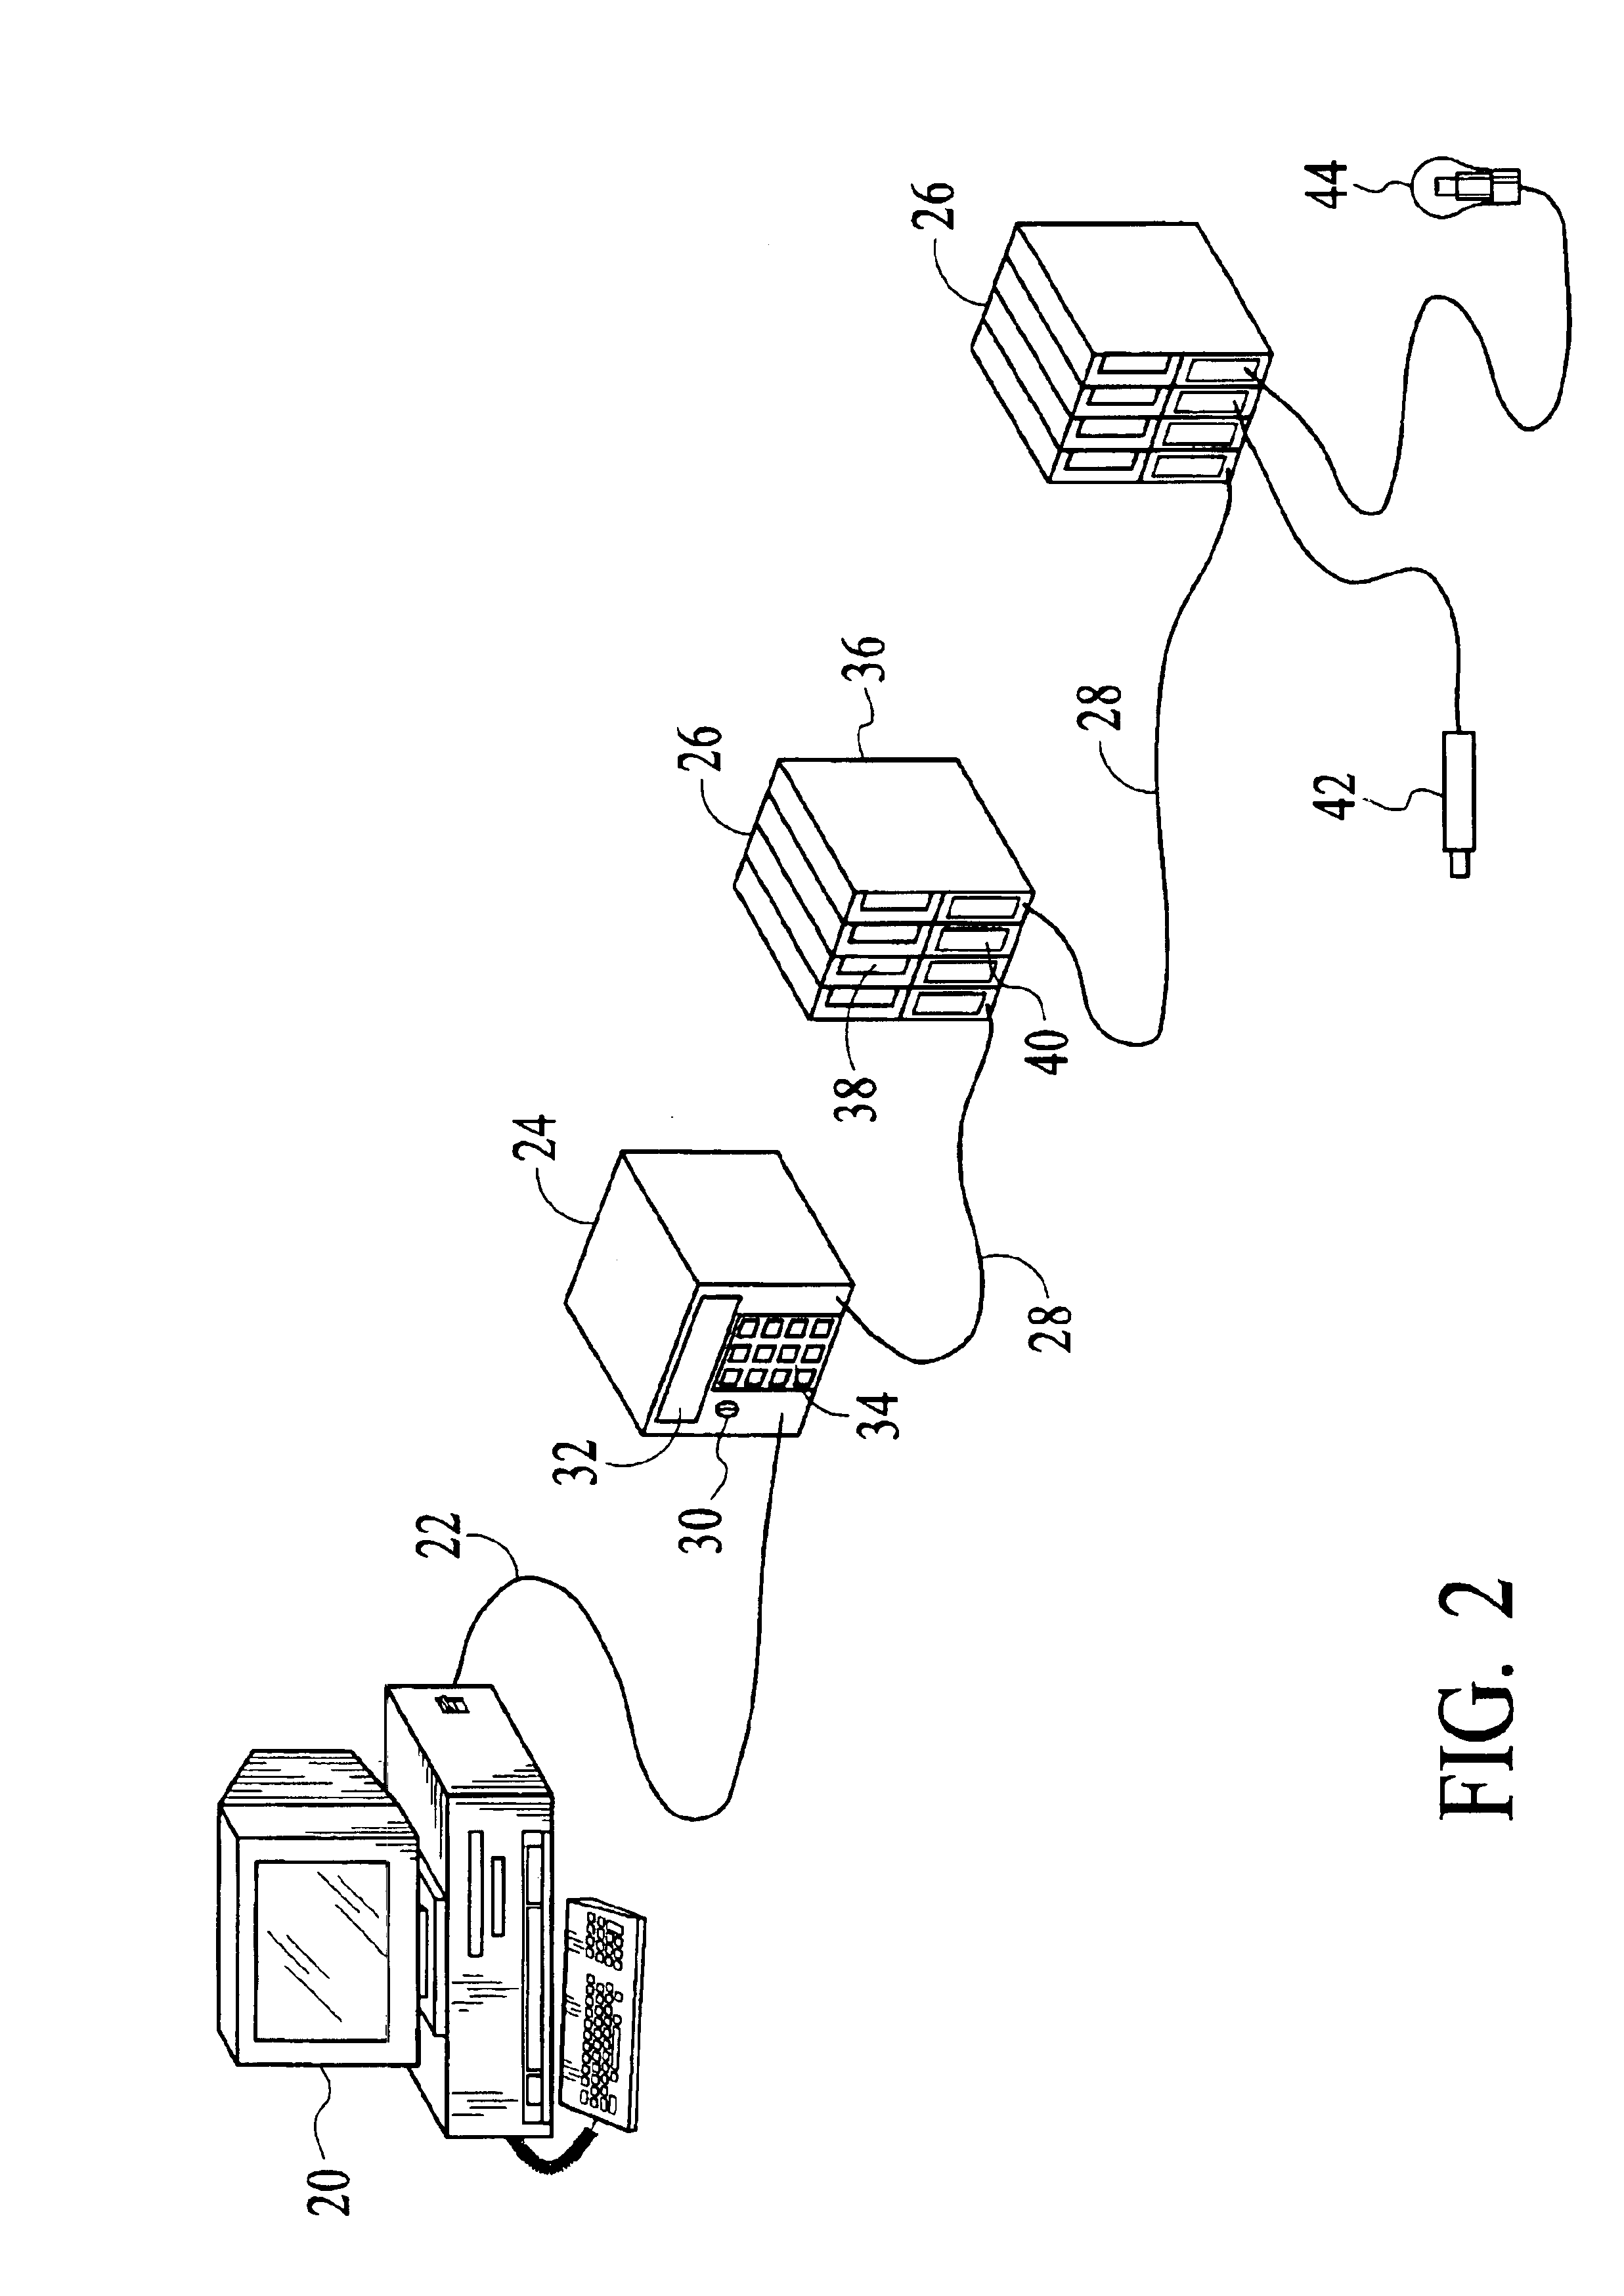 Input/output control systems and methods having a plurality of master and slave controllers